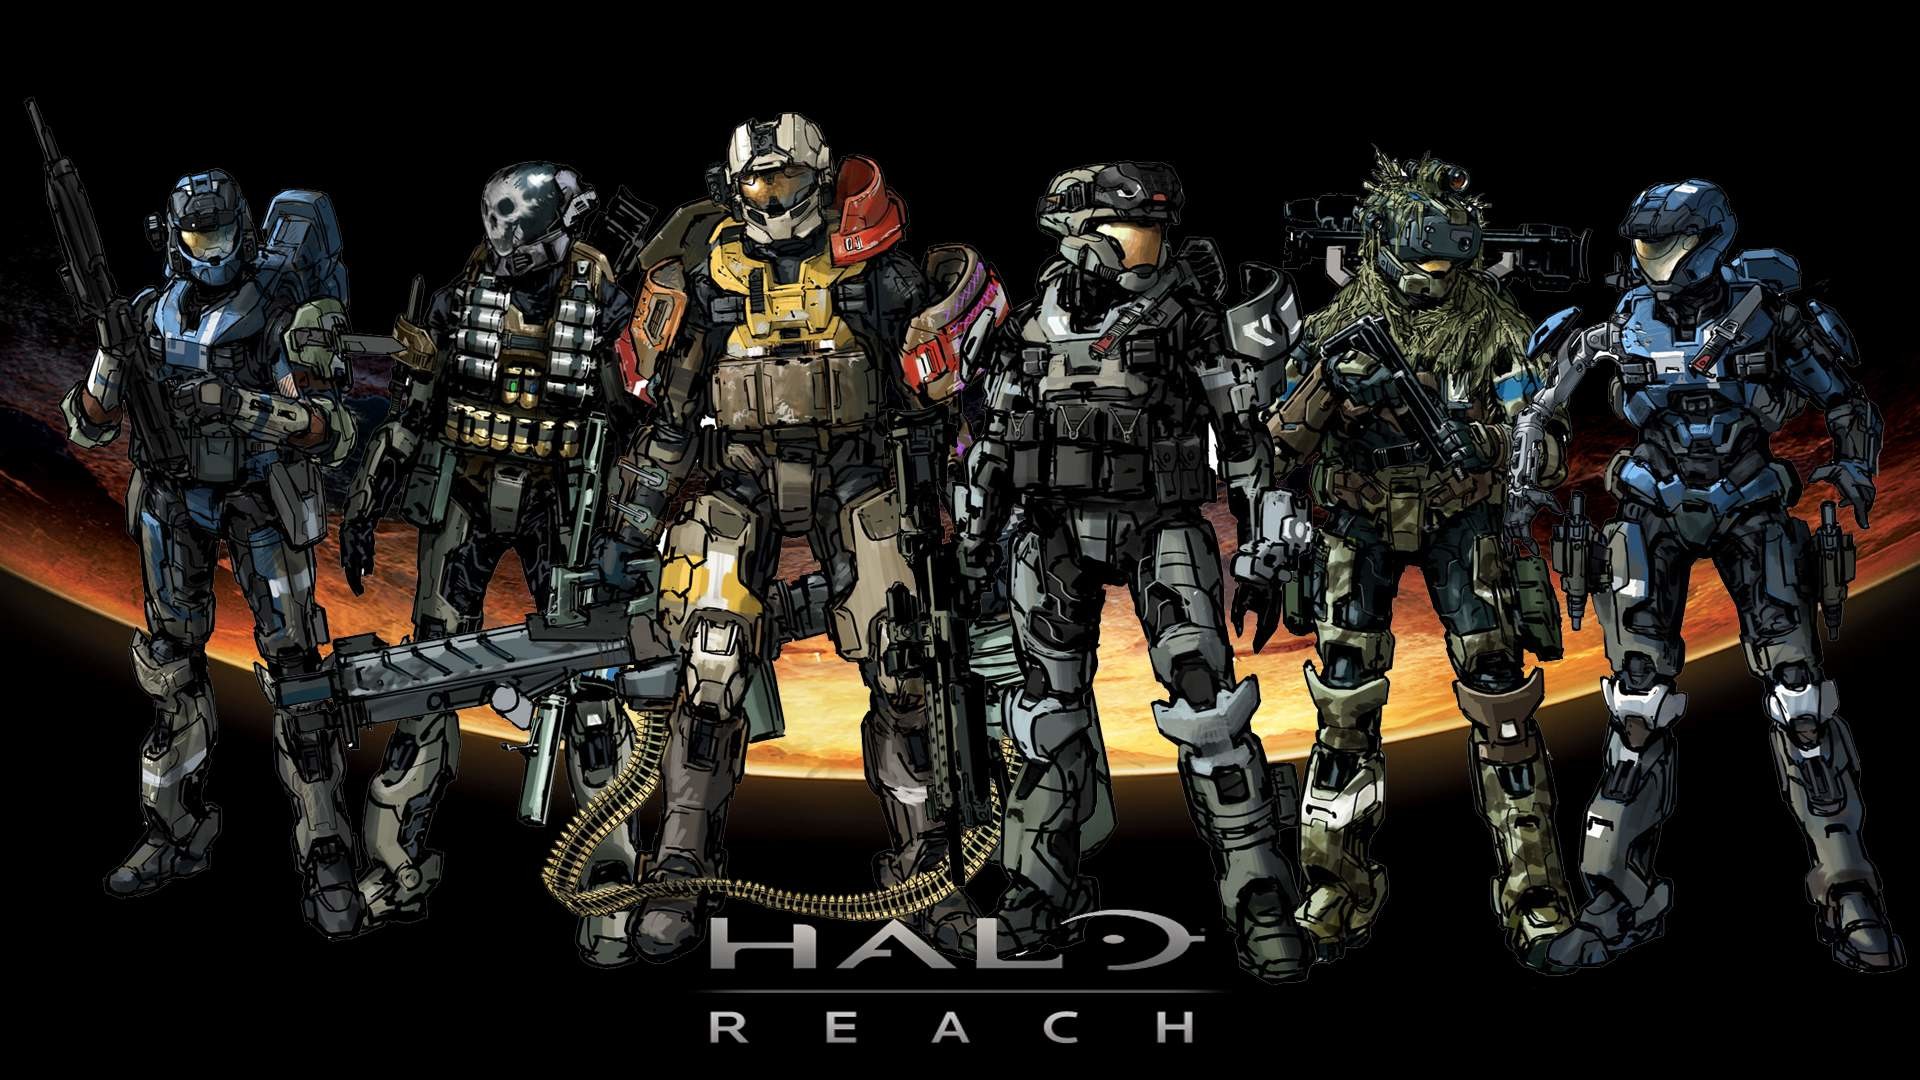 1920x1080 Halo Reach wallpaper (#755855) / Wallbase.cc | Wallpapers. | Pinterest |  Halo reach and Wallpaper